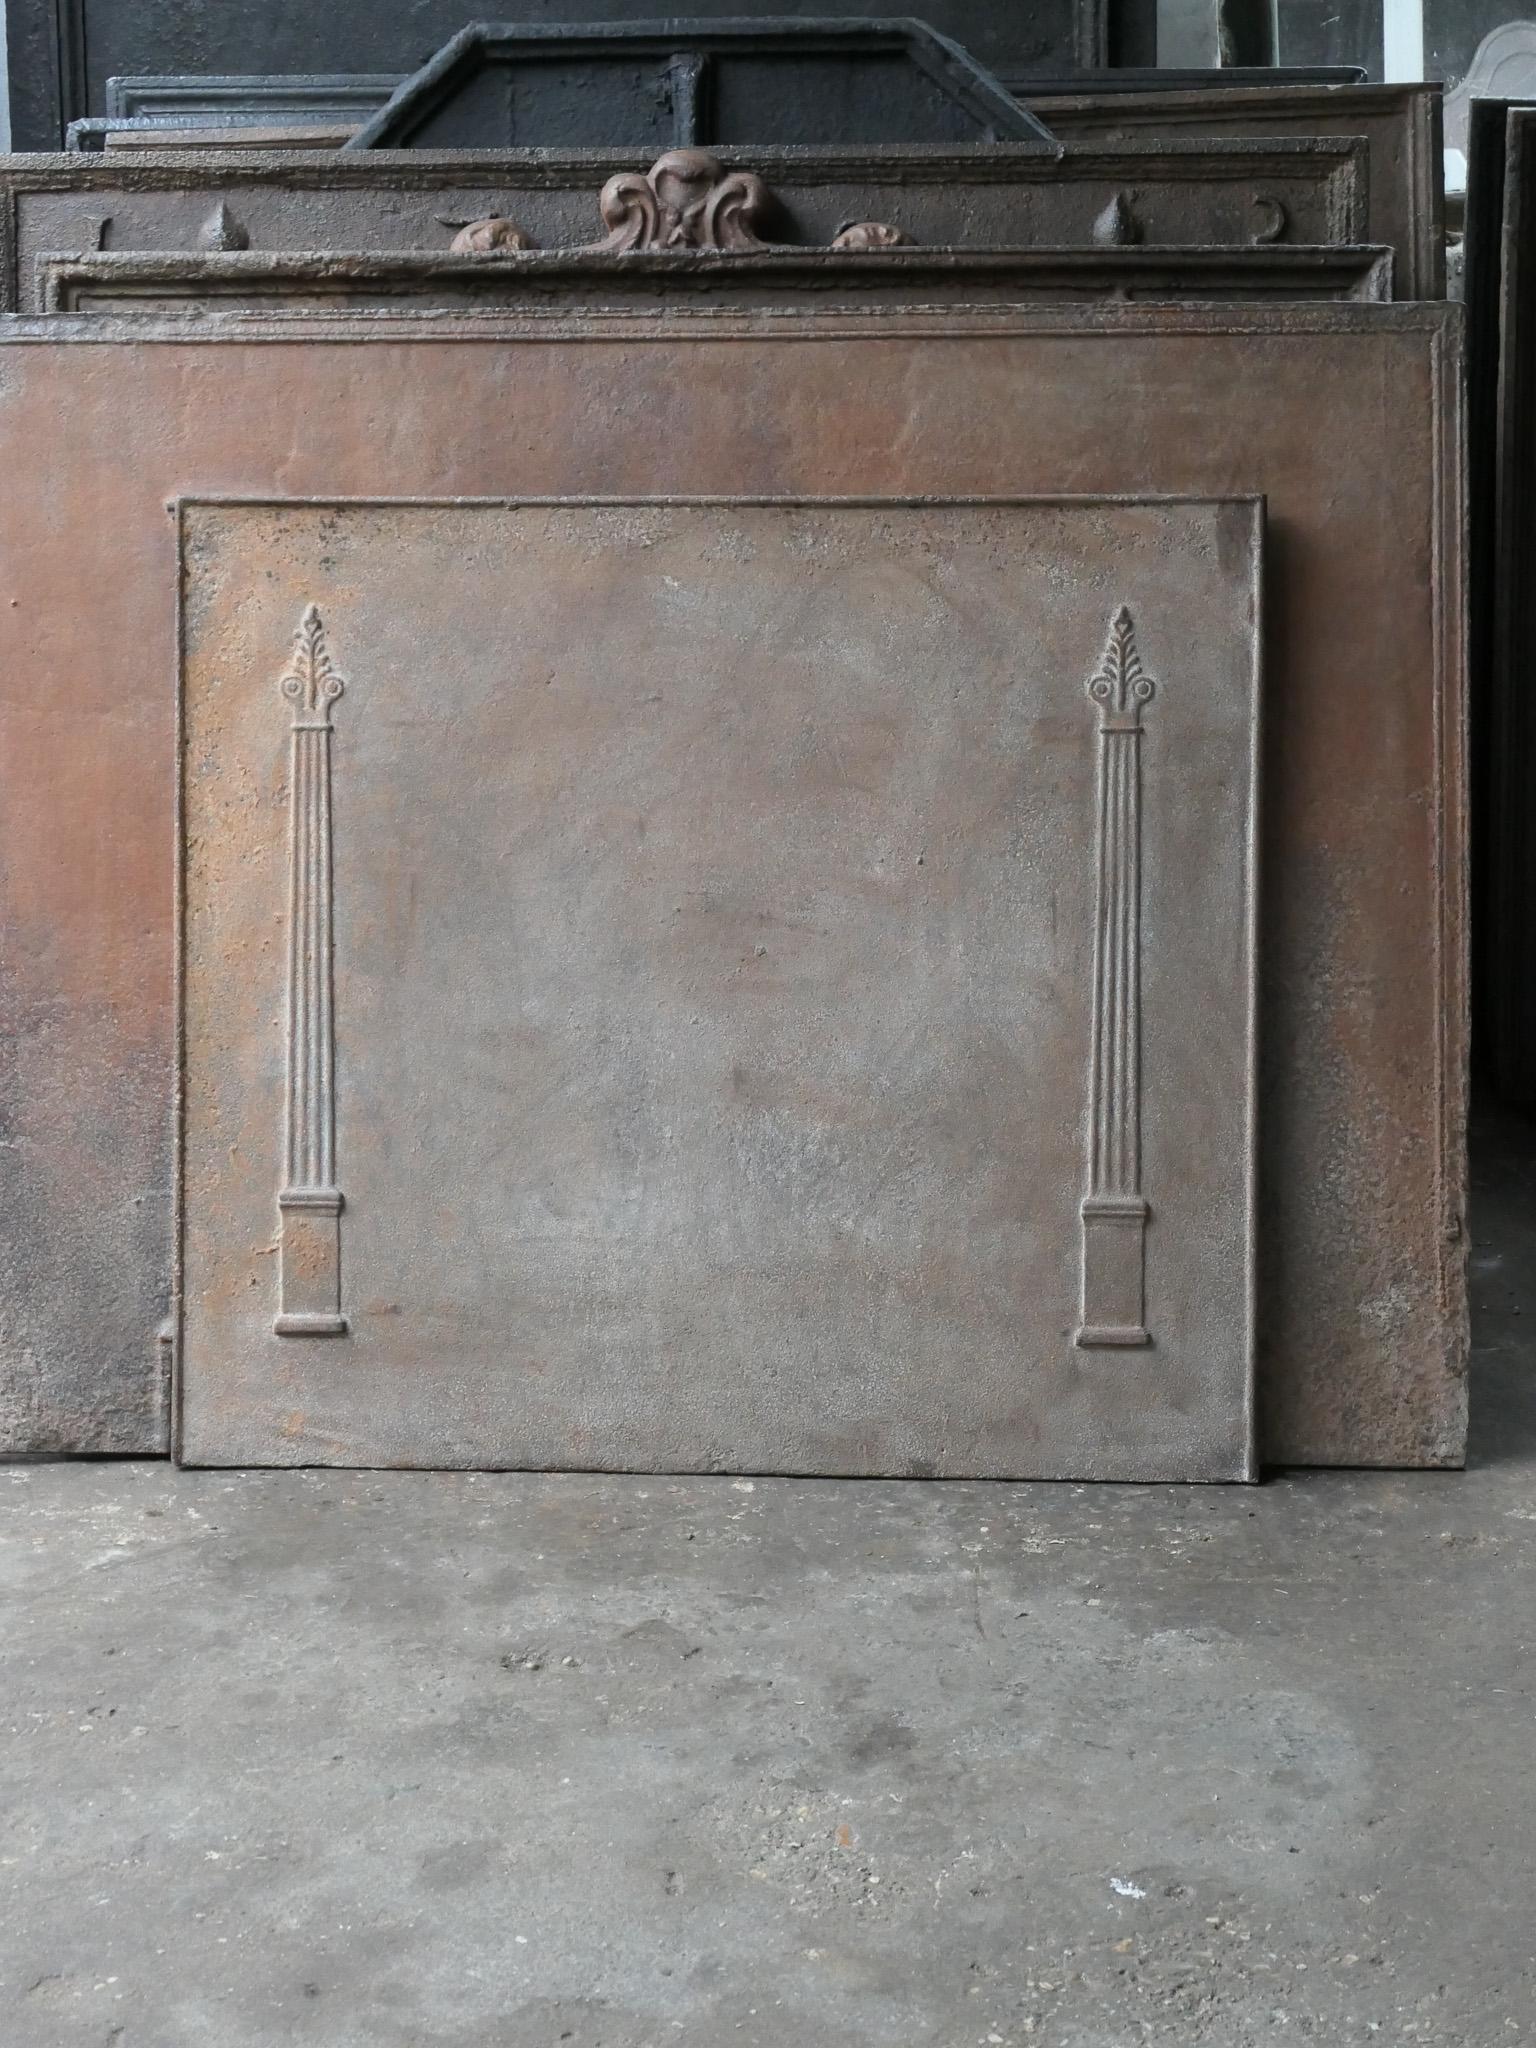 19th Century French Neoclassical fireback with two pillars of freedom. The pillars symbolize the value liberty, one of the three values of the French revolution.

The fireback is made of cast iron and has a natural brown patina. Upon request it